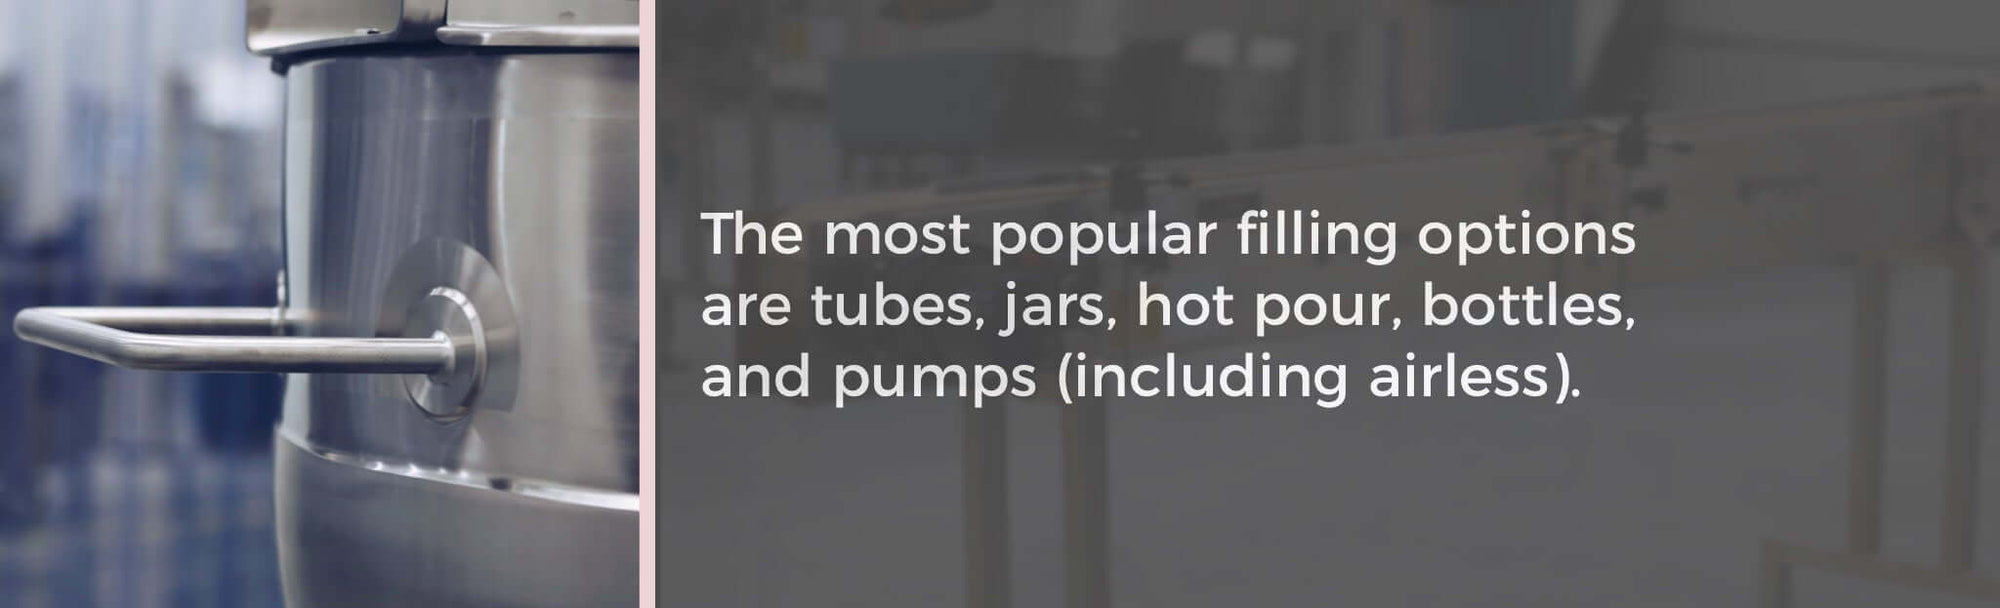 At Artisan Labs, the most popular filling options are tubes, jars, hot pour, bottles, and [pumps, including airless pumps.